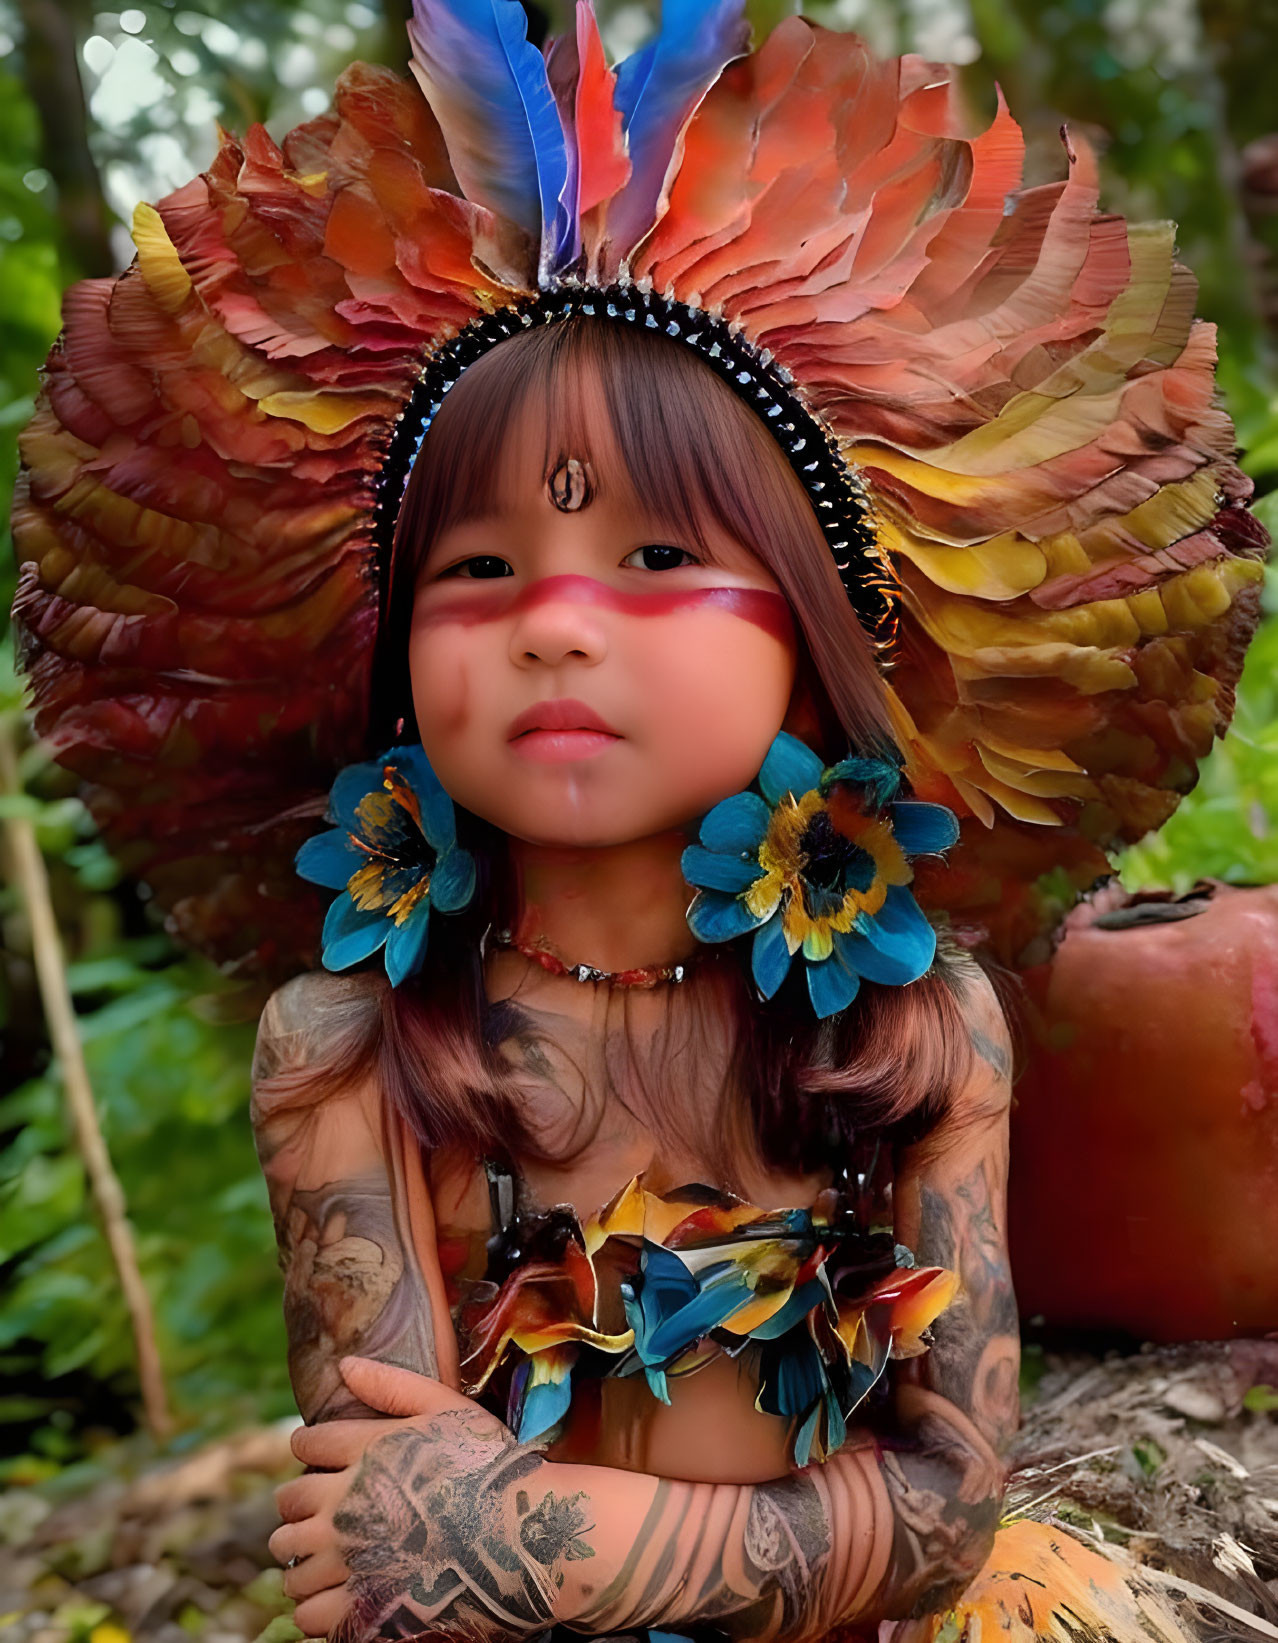 Child with face paint and feather headdress in nature pose